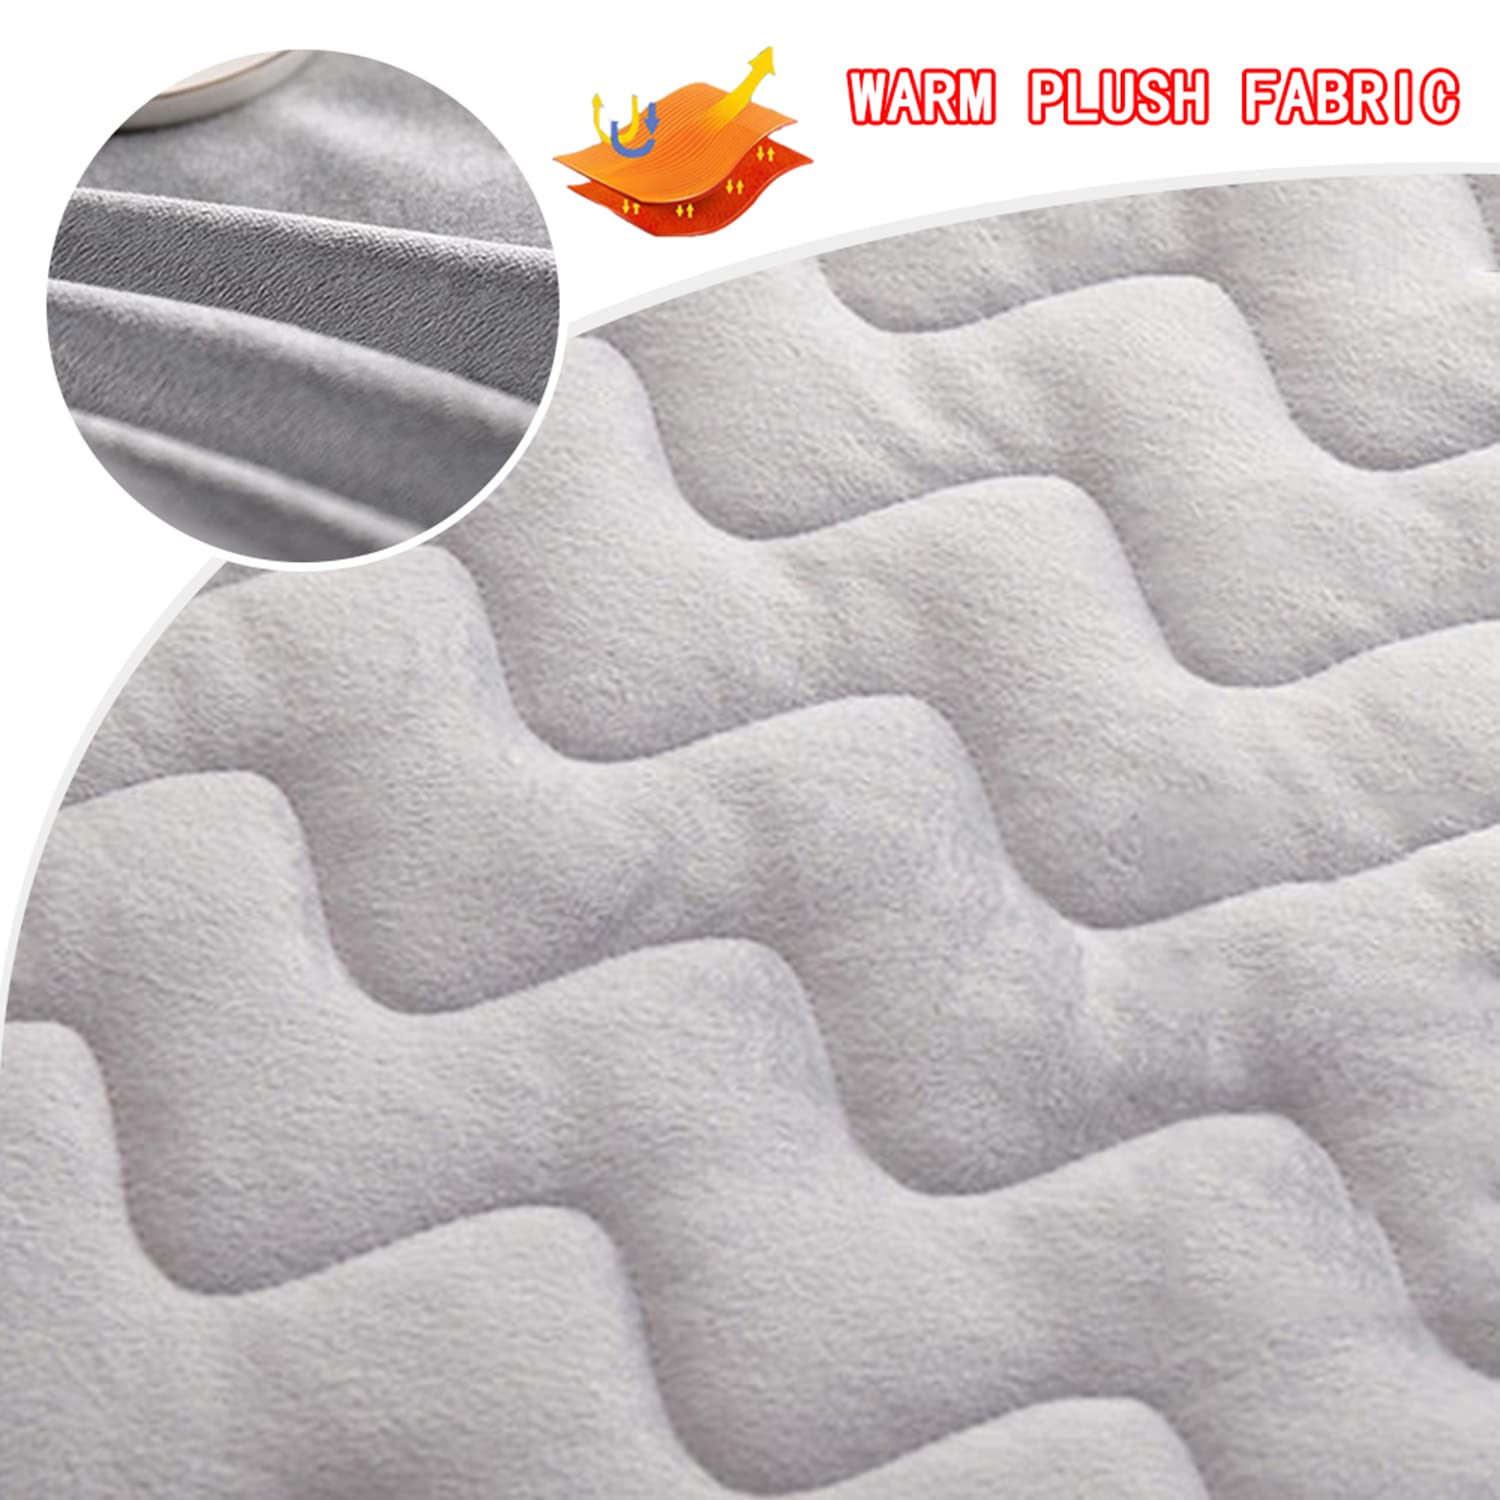  gum band attaching beauty bed mattress topa- square head massage table mattress protector spa bed high density sponge mattress pad .. hole 